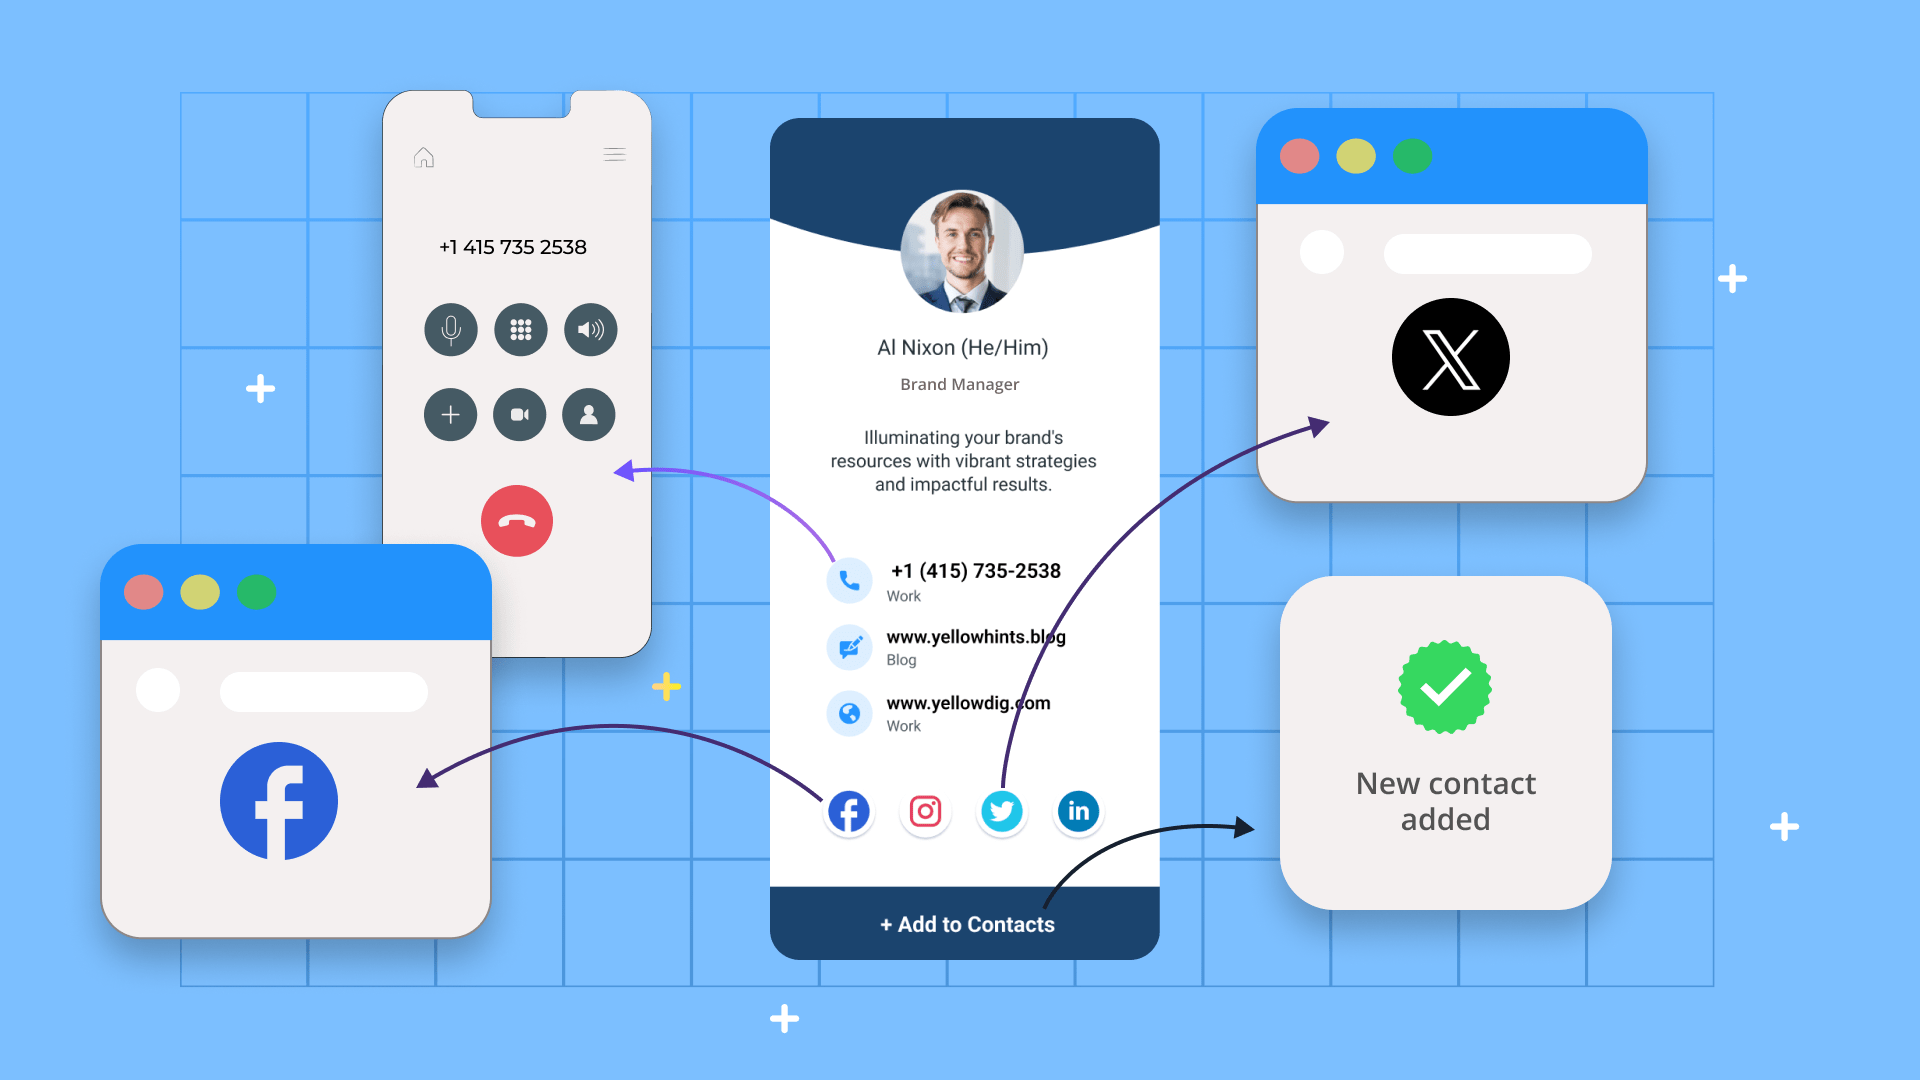 How To Make a Digital Business Card for an Interactive Networking Experience